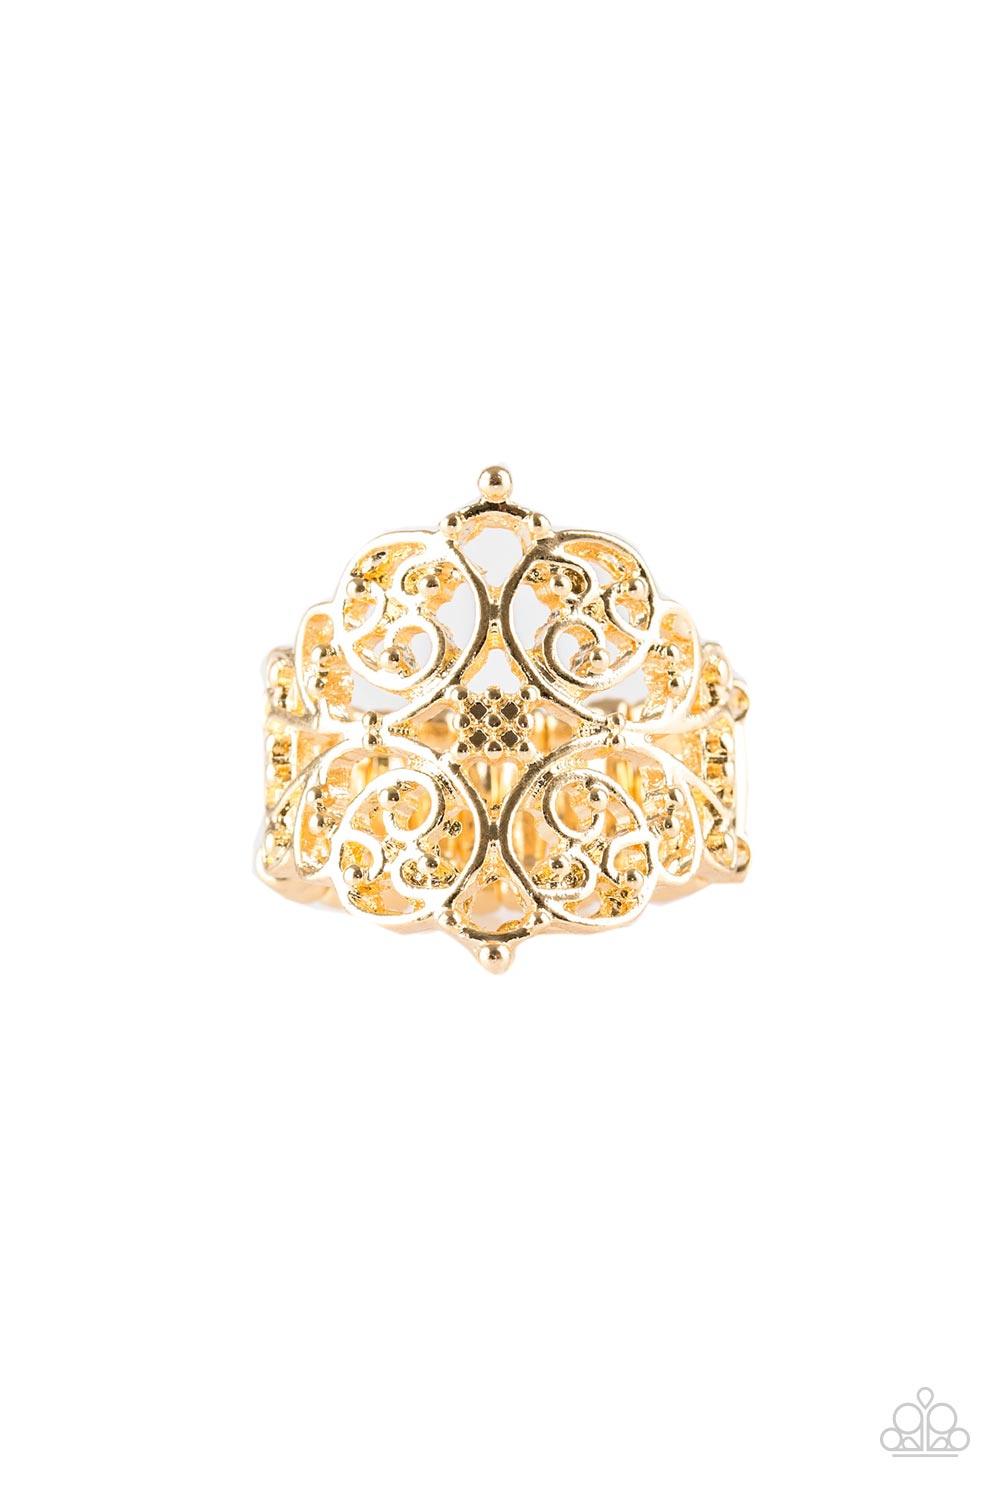 Paparazzi Accessories Victorian Valor - Gold Brushed in a glistening finish, shimmery gold filigree vines curl across the finger, coalescing into an airy frame for a vintage-inspired look. Features a stretchy band for a flexible fit. Sold as one individua